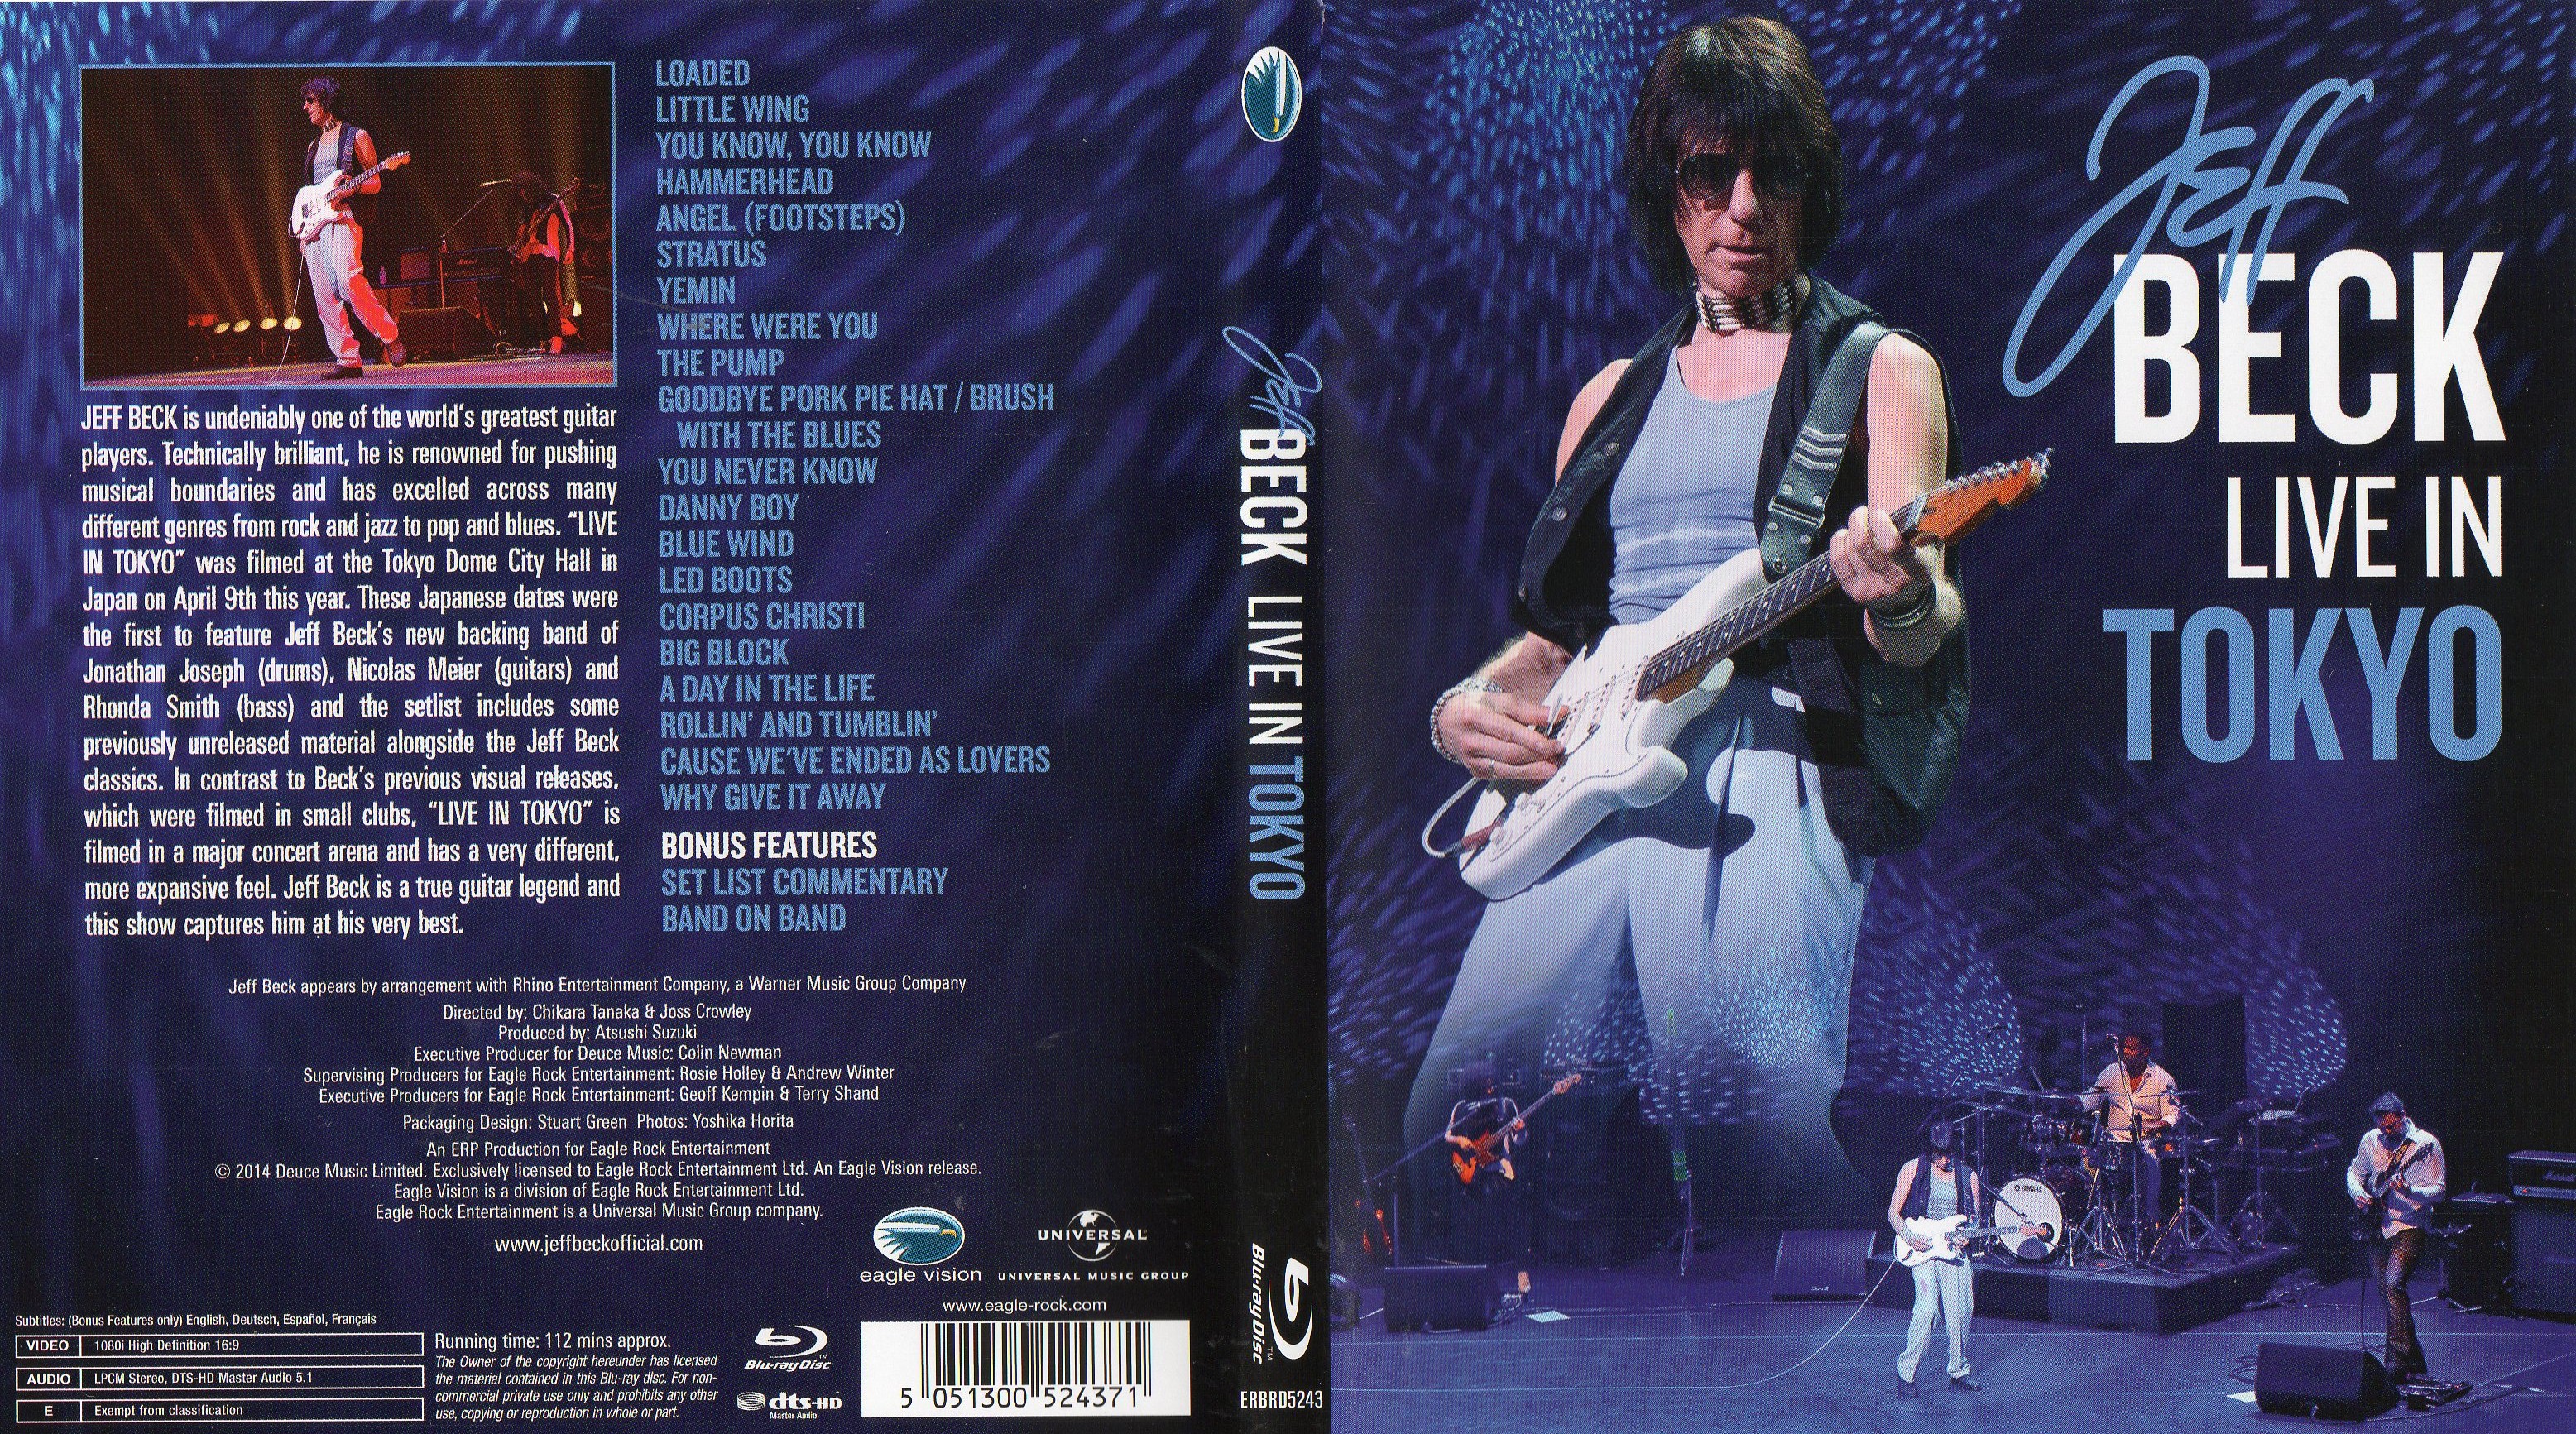 Jaquette DVD Jeff Beck Live in Tokyo (BLU-RAY)